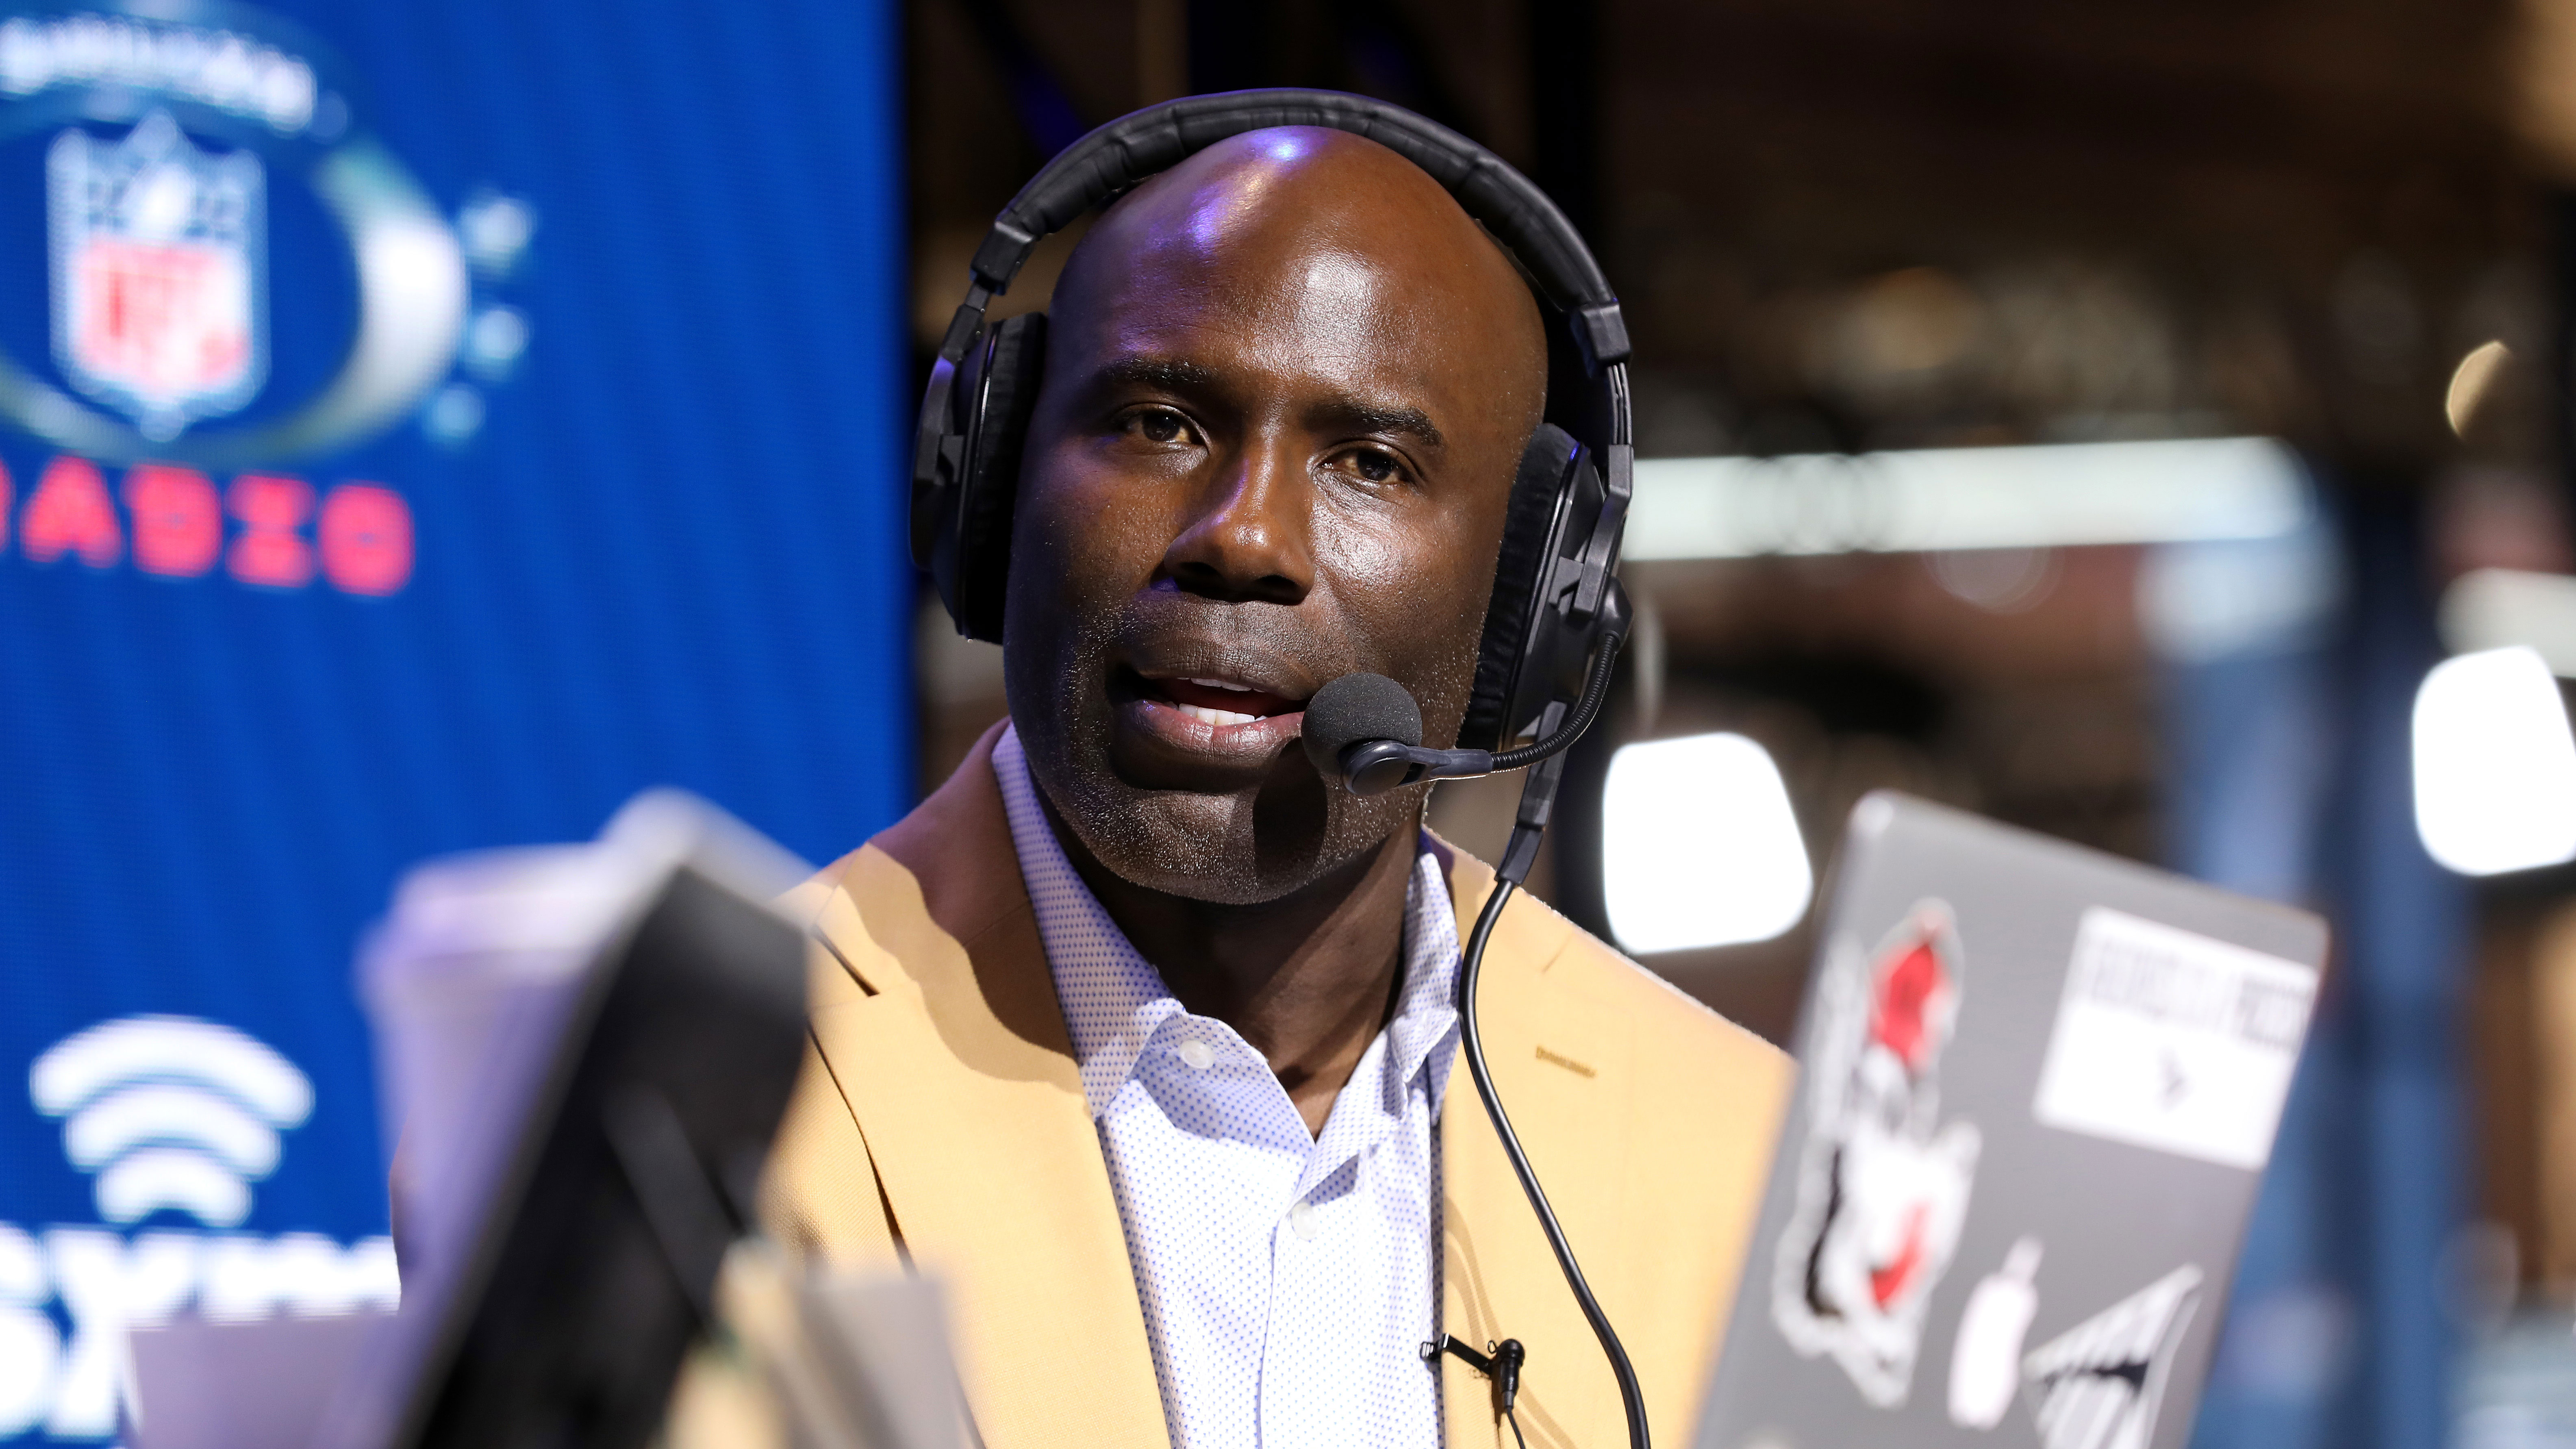 Football Hall of Famer Terrell Davis believes race played role in handcuffed removal from United flight